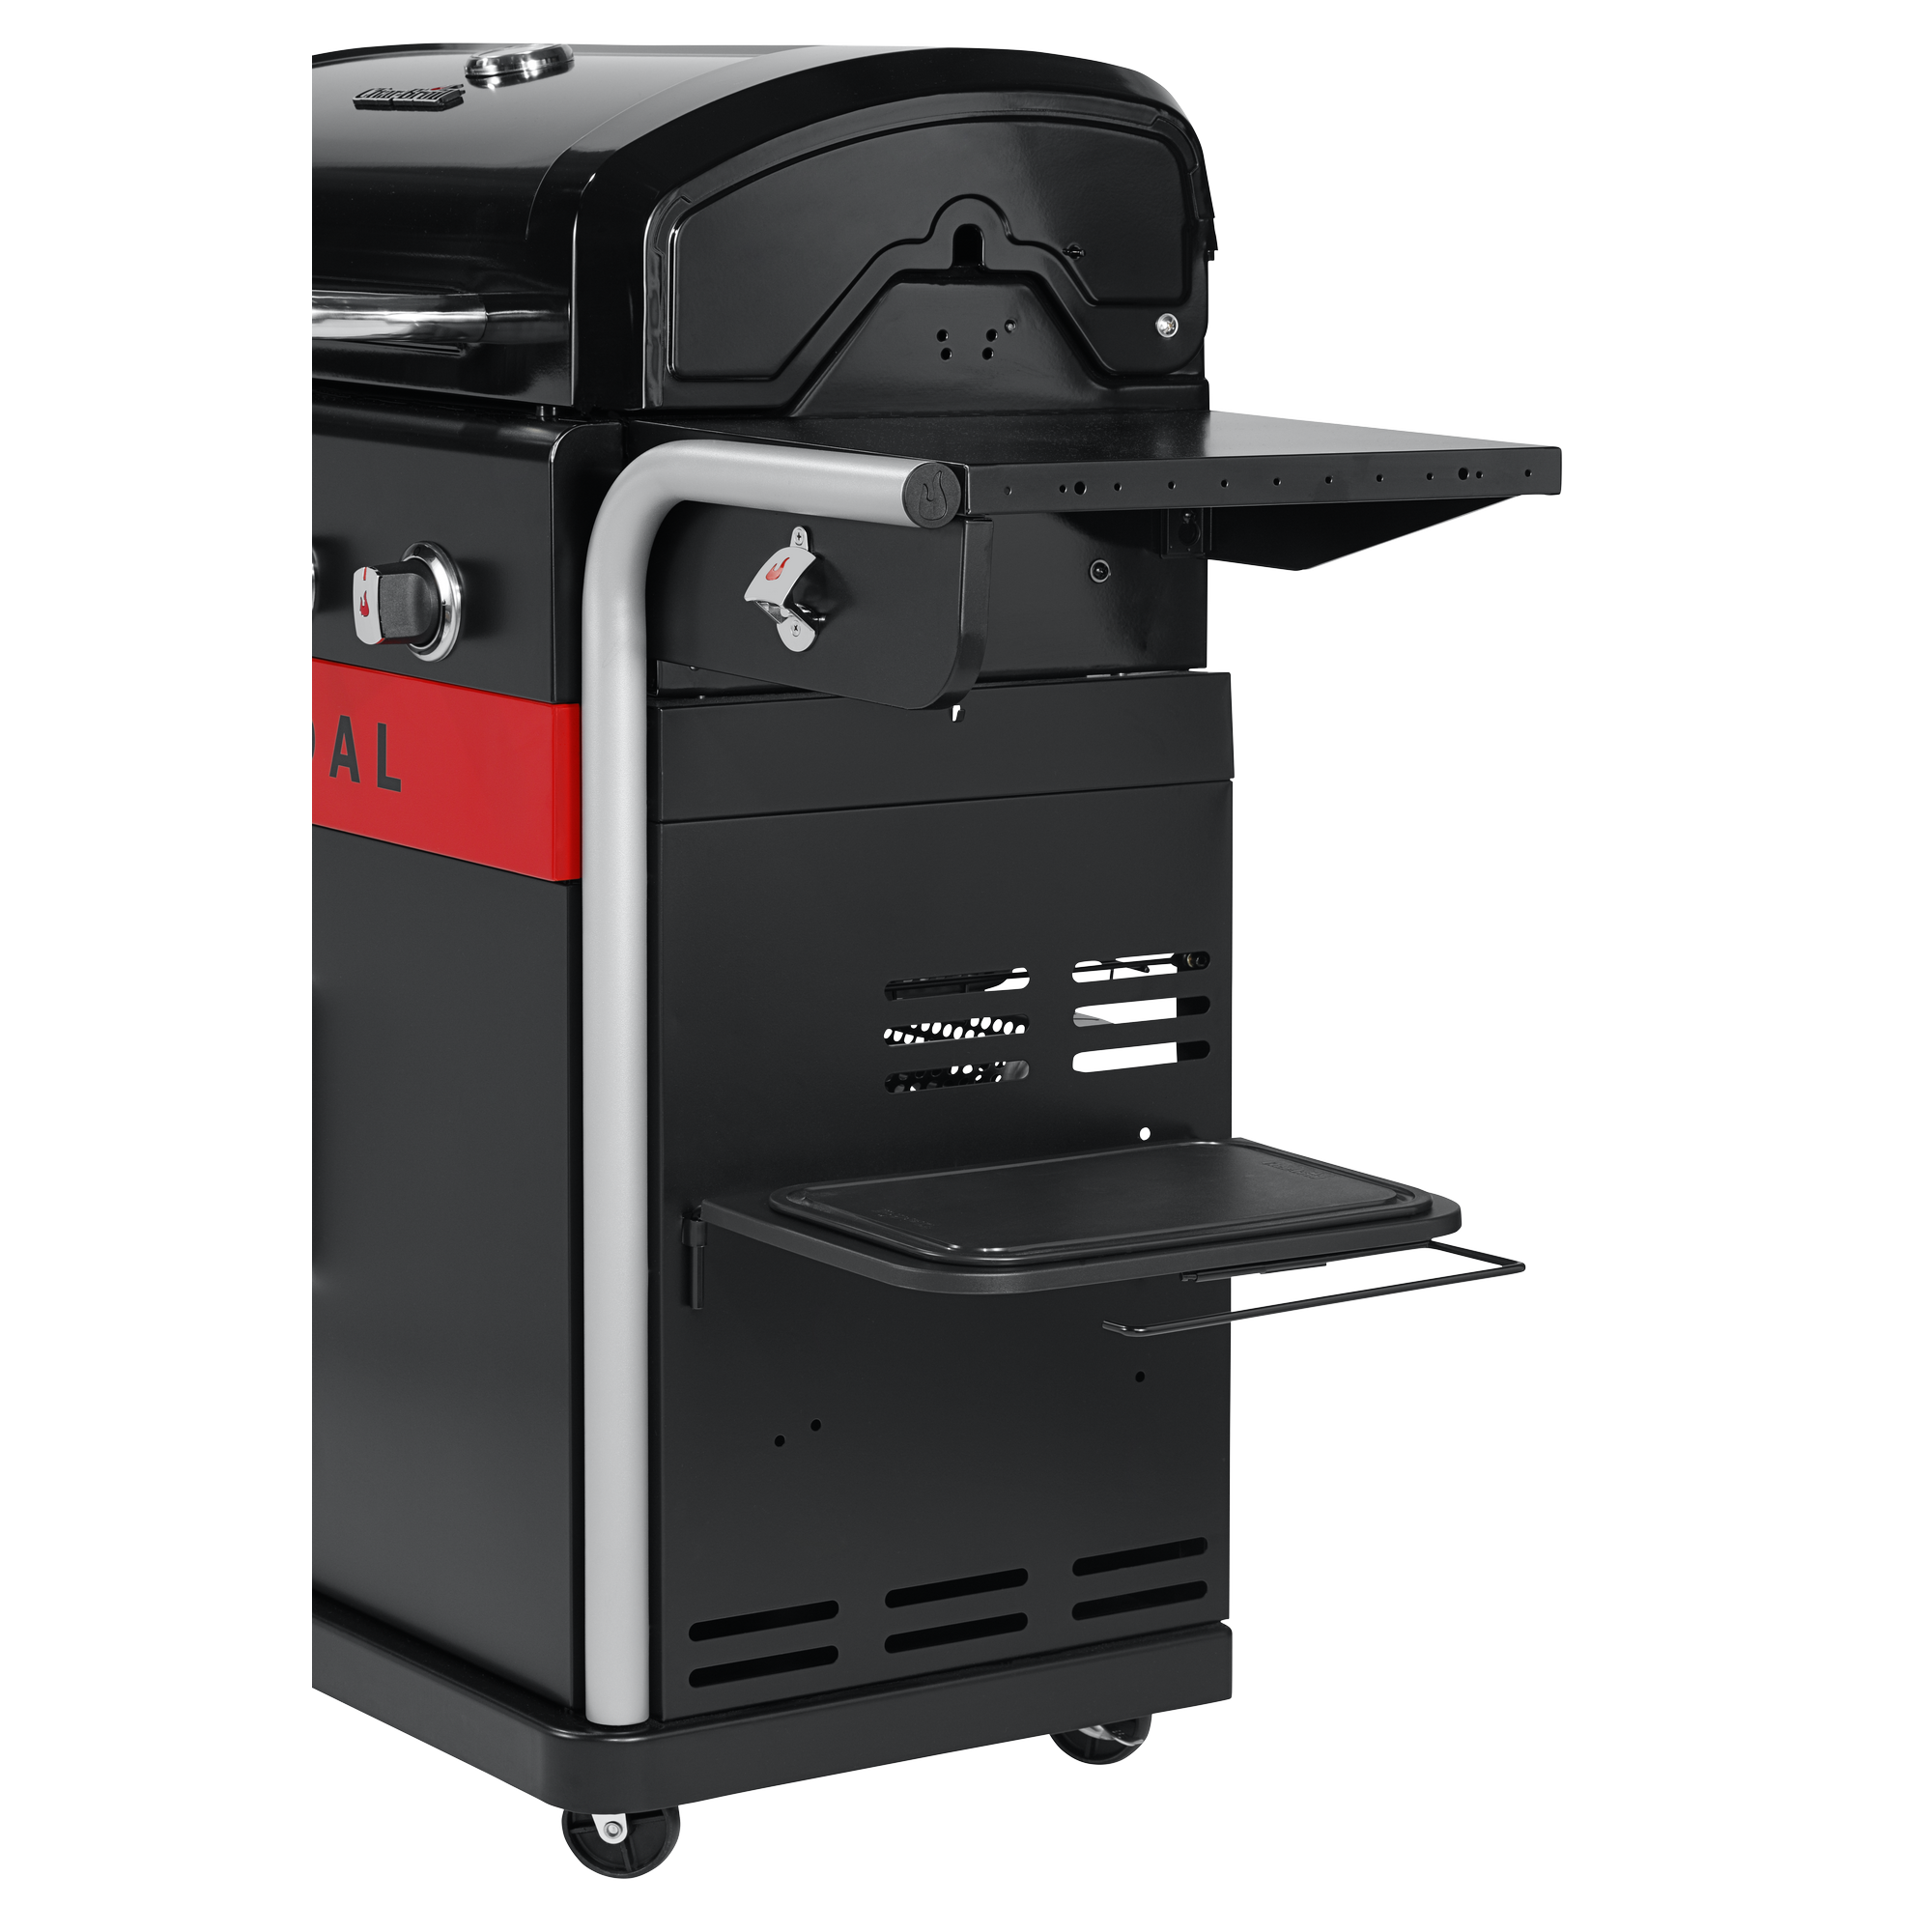 Grill-Multifunktionsablage 'MADE2MATCH' schwarz 39,4 x 26,7 x 6,4 cm + product picture